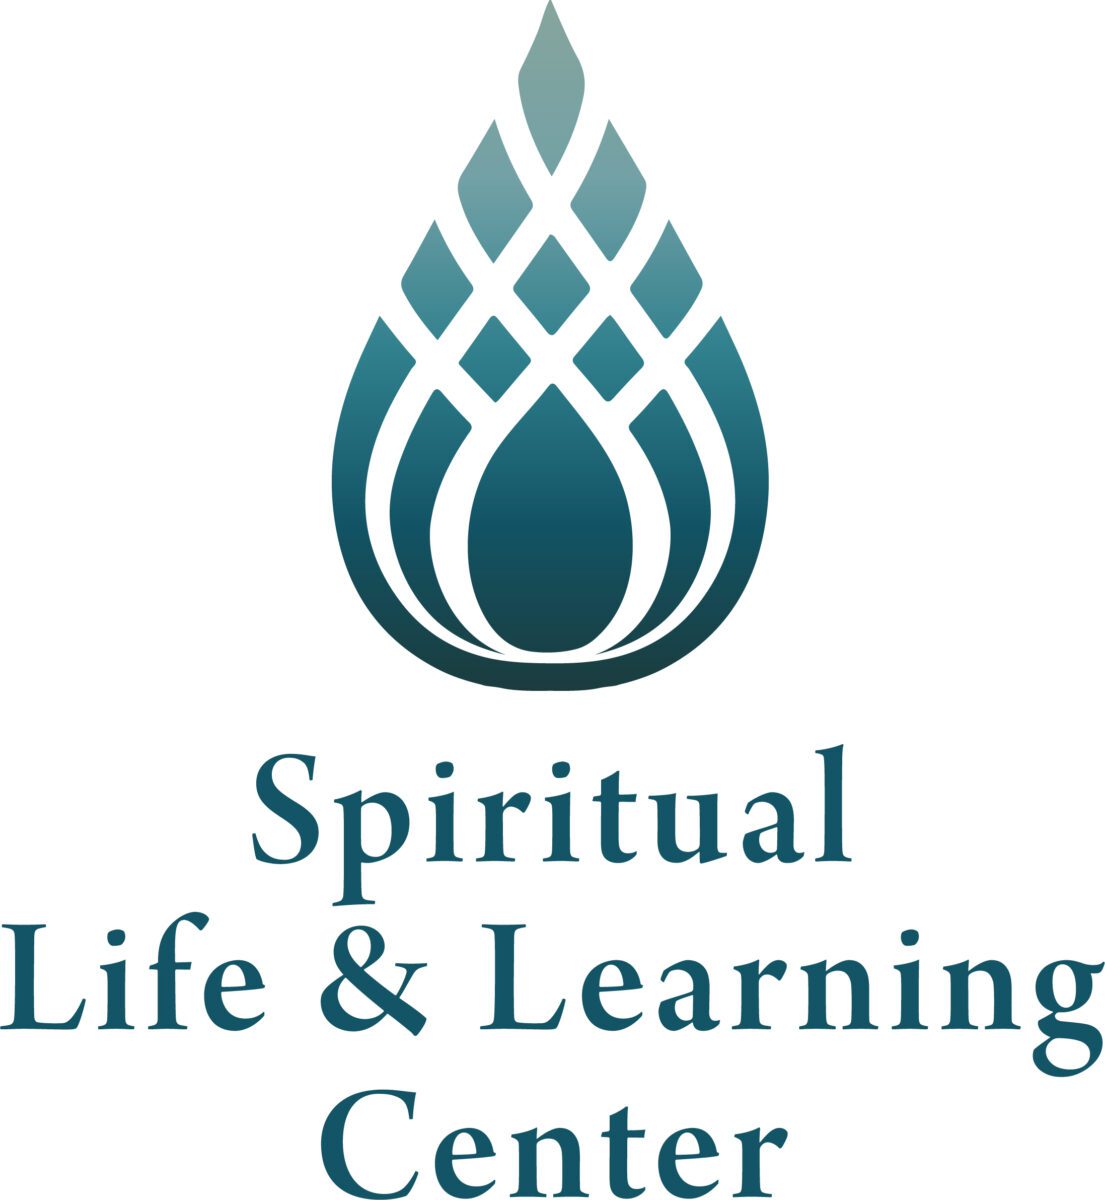 Center Logo is a teal-colored artistic rendering of a flame